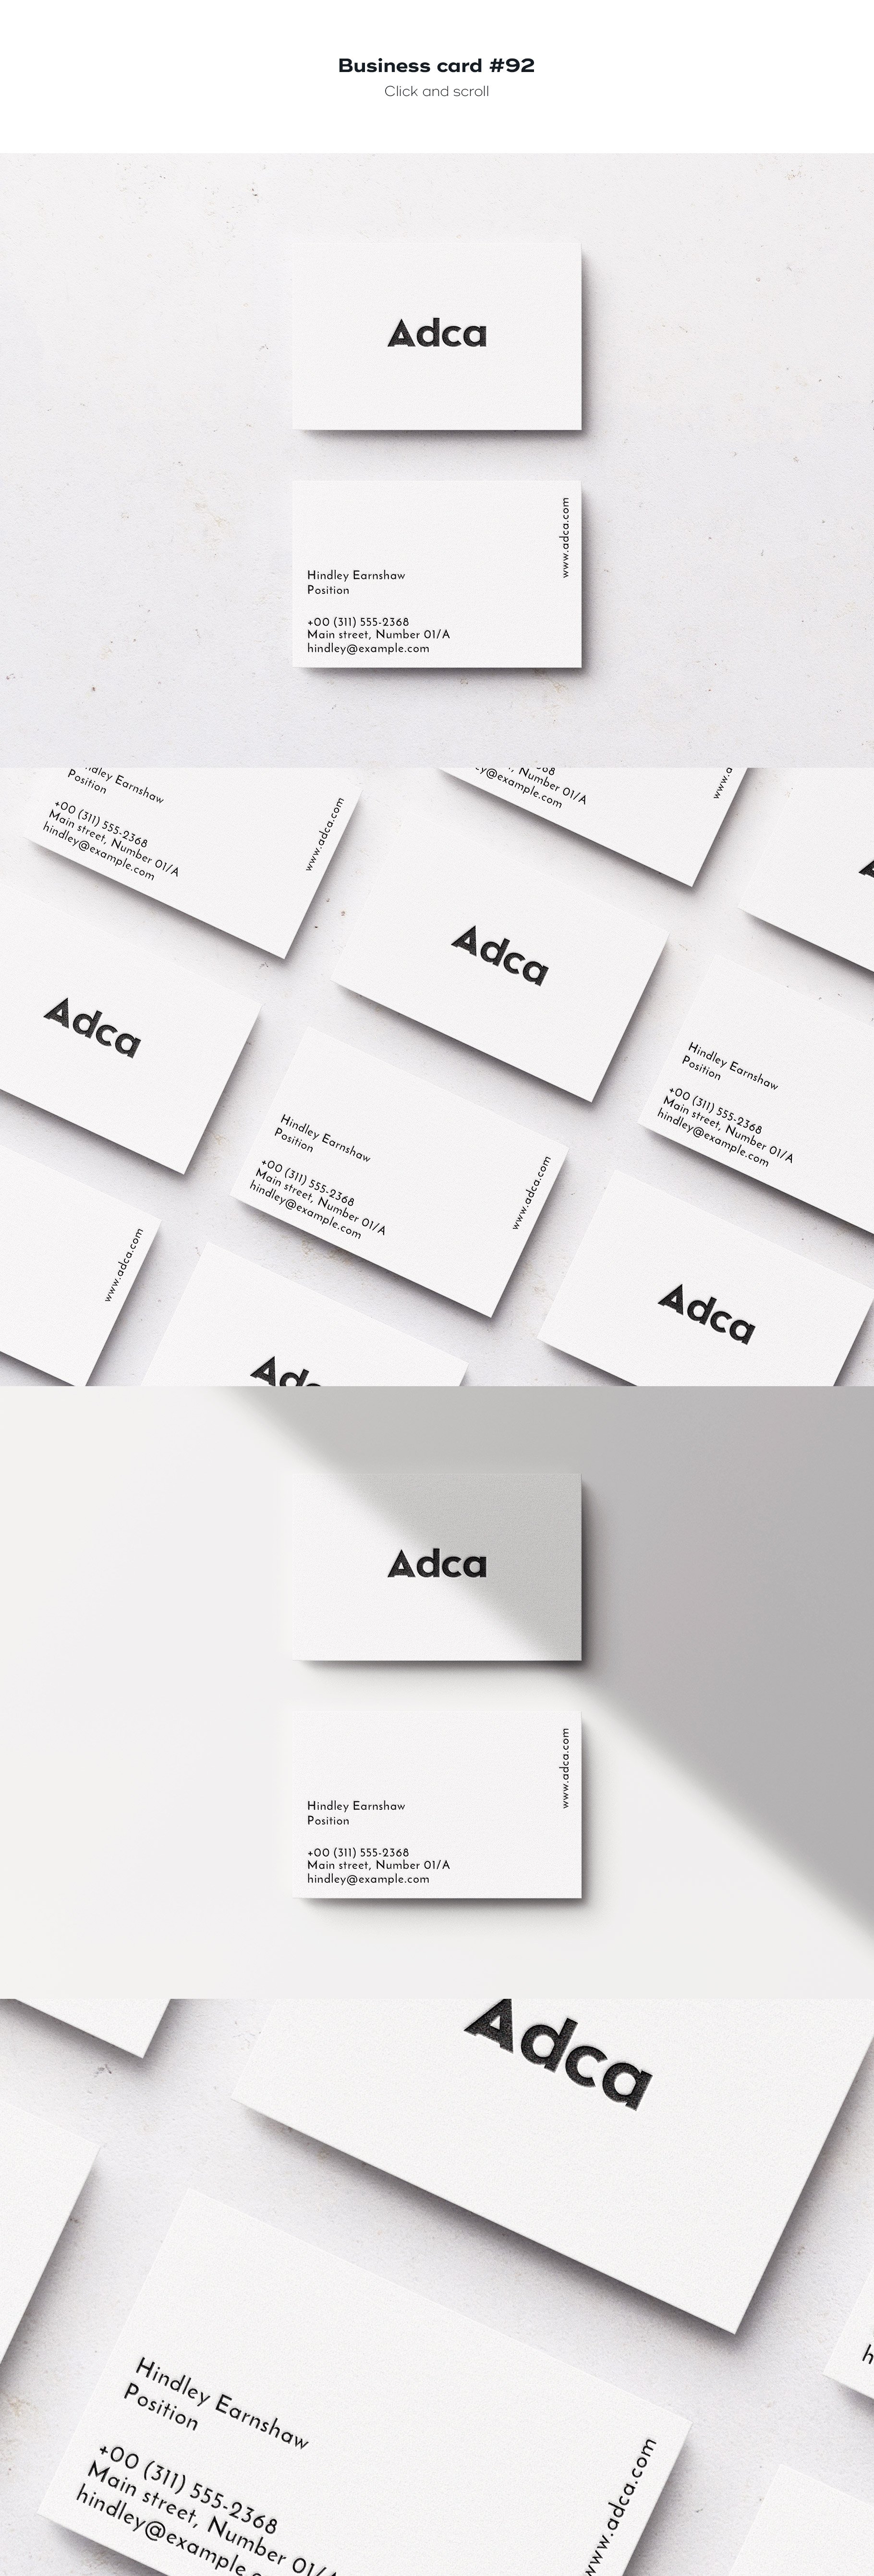 business card 92 552